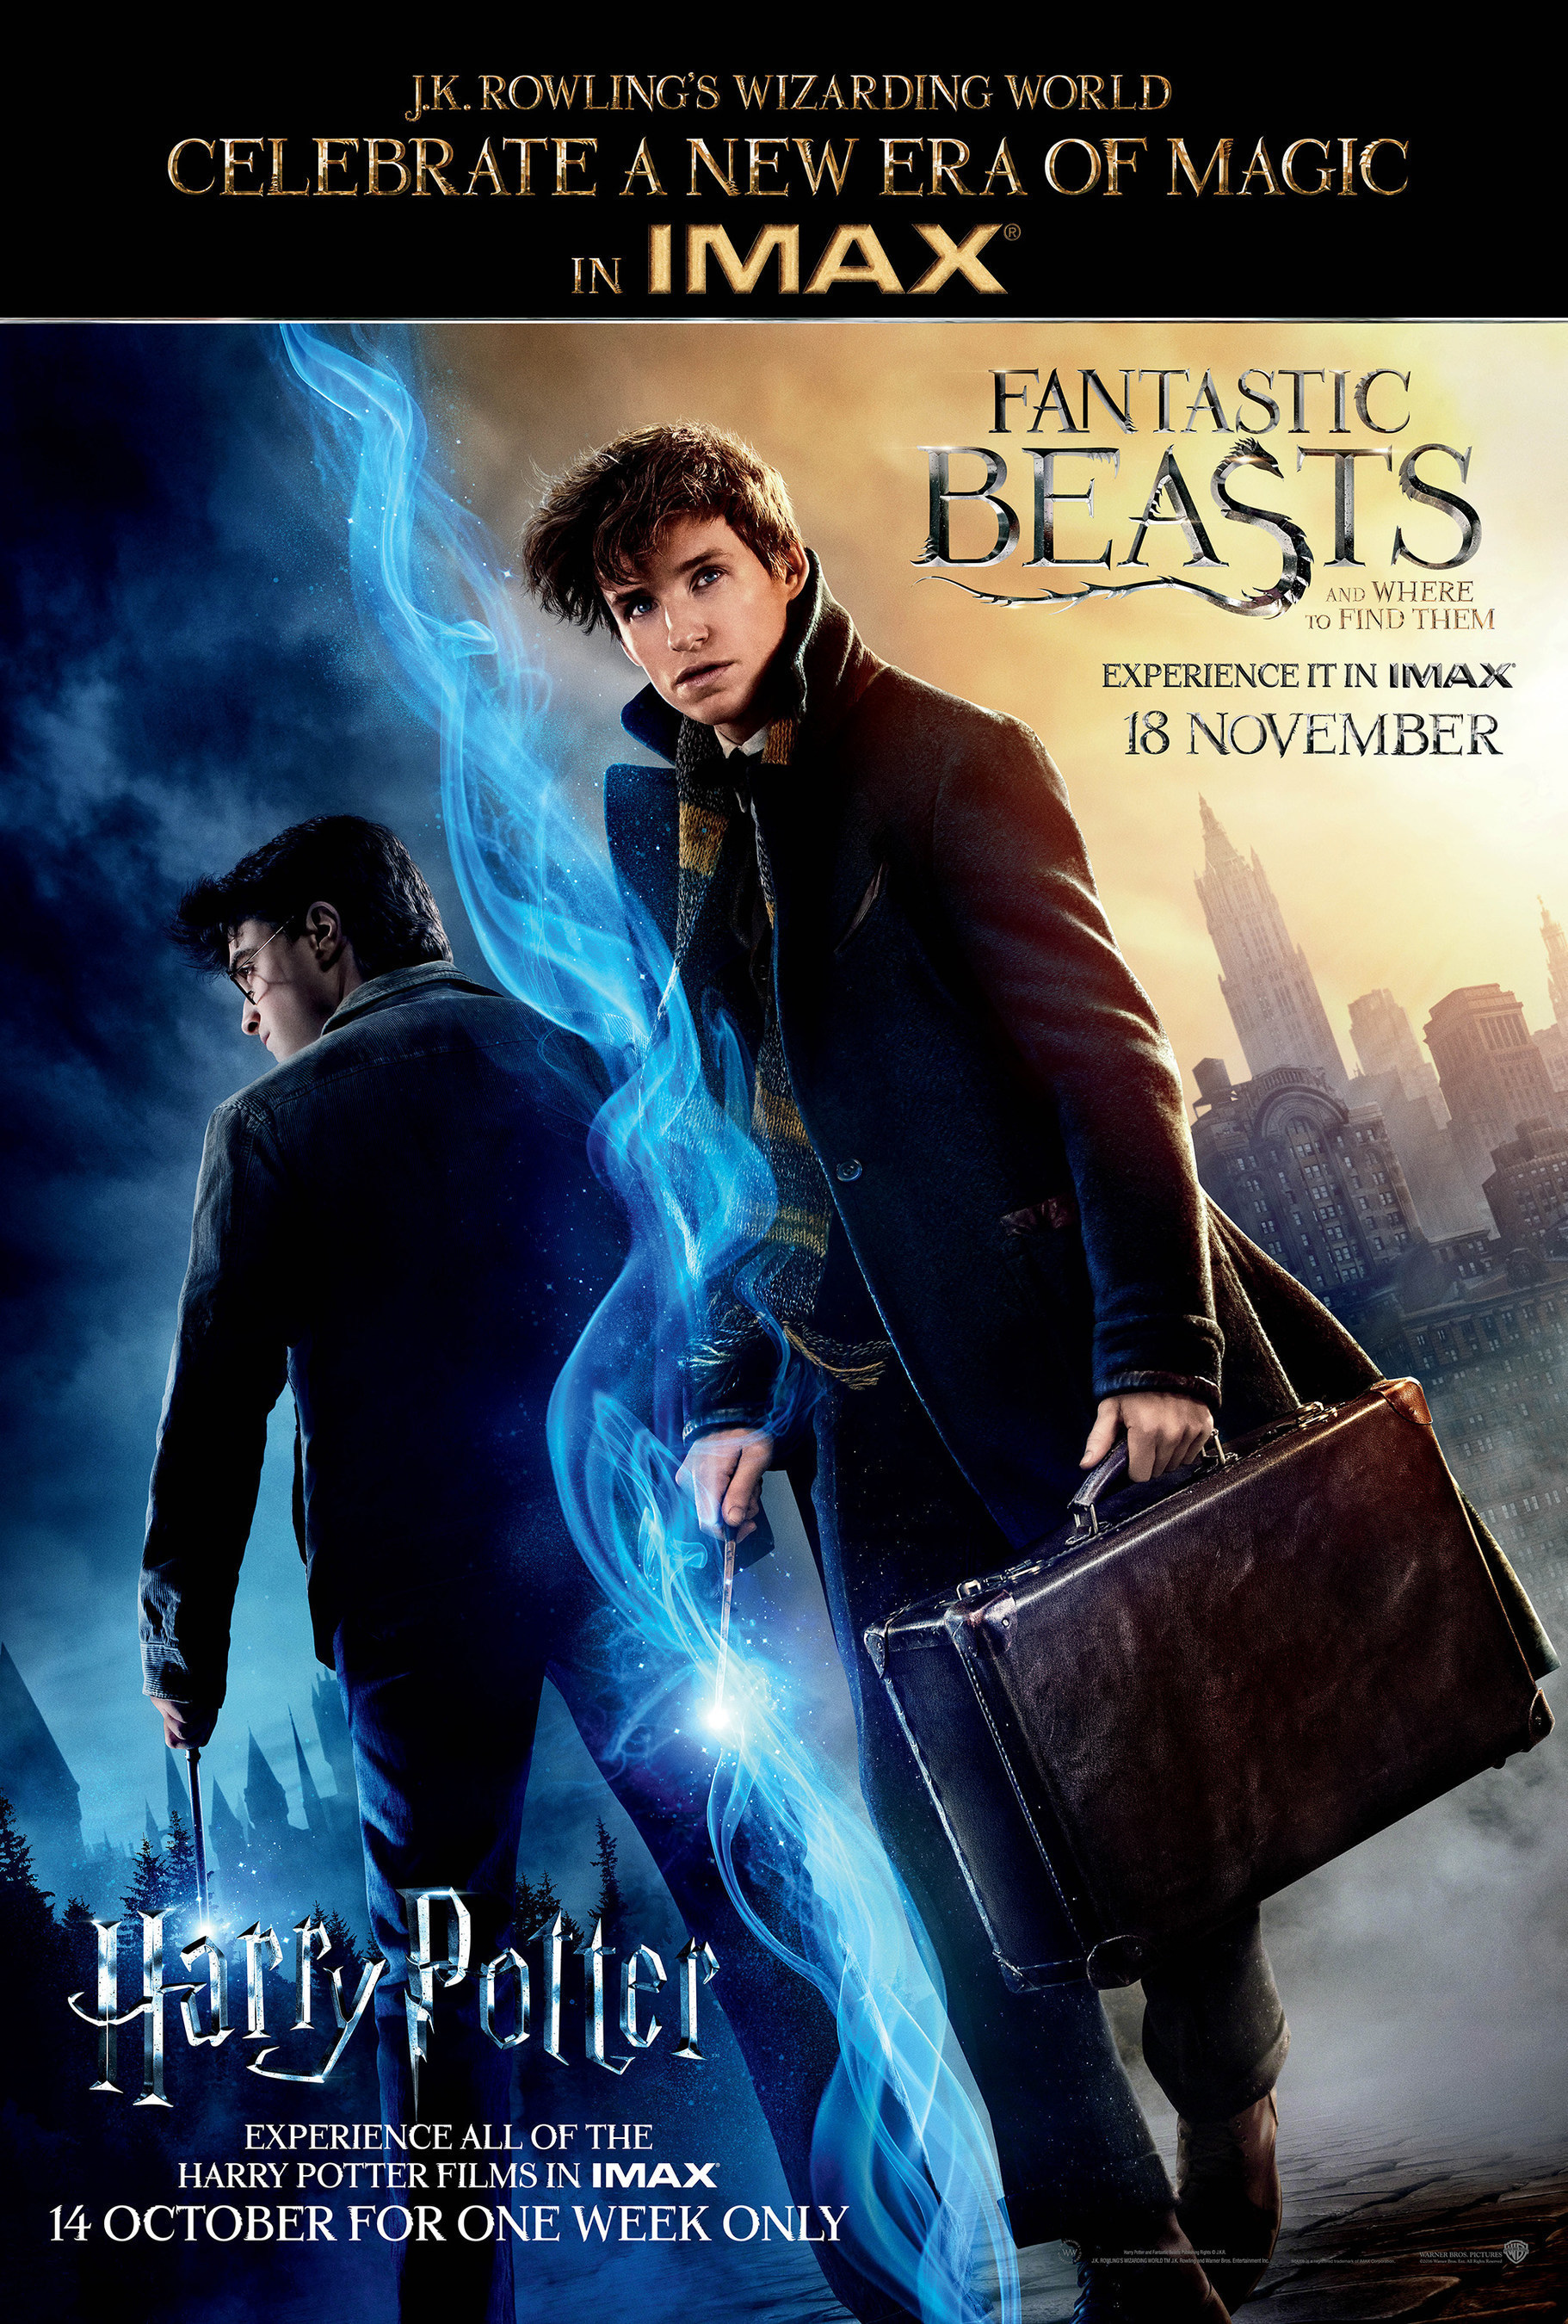 Warner Bros Pictures Entire Harry Potter Franchise To Be Released In Imax Theatres For Exclusive One Week Engagement Beginning Oct 13